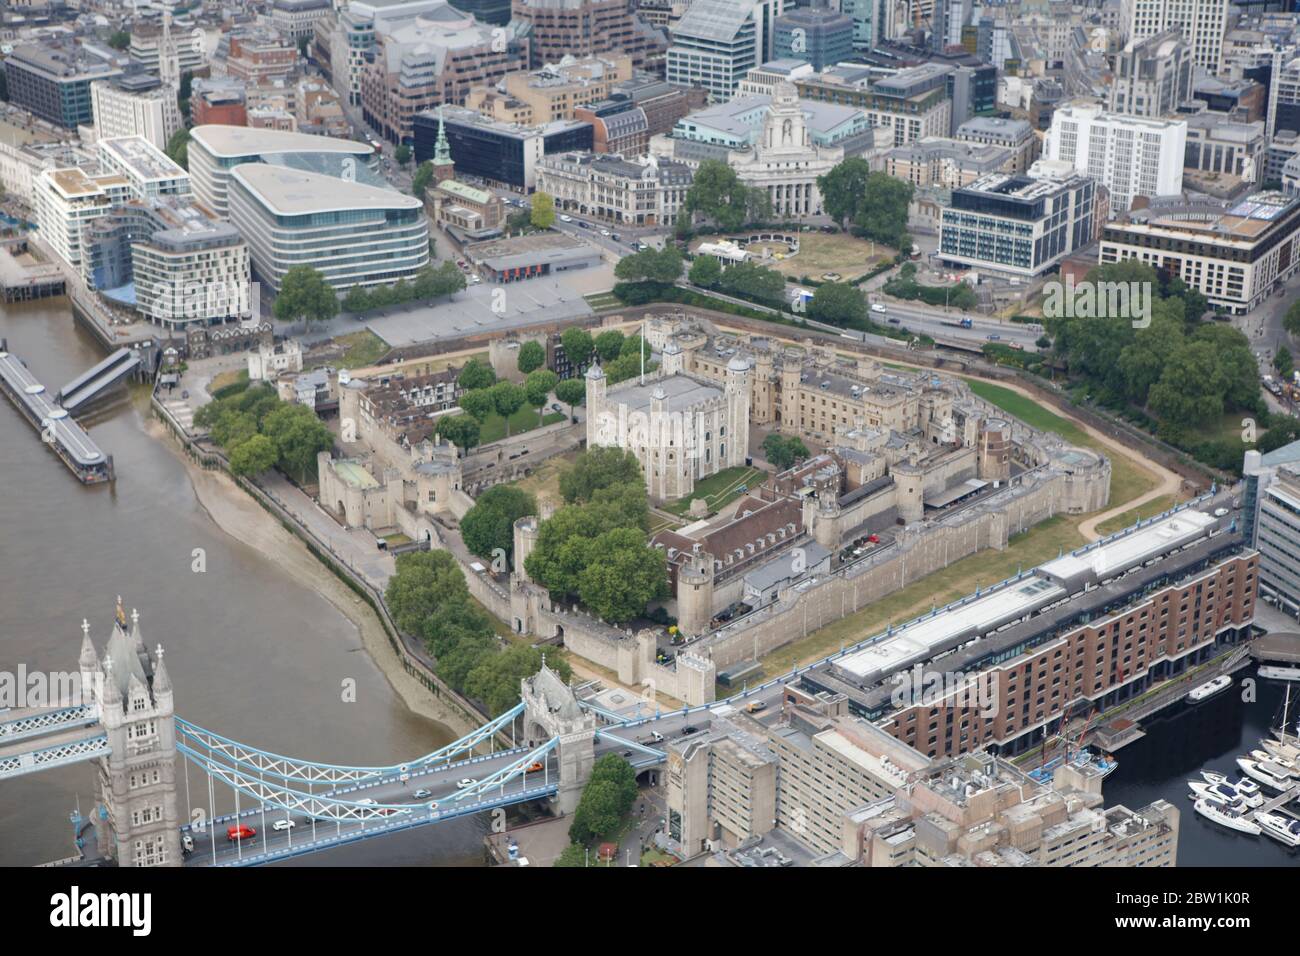 Aerial View of London's Tower of London Stock Photo